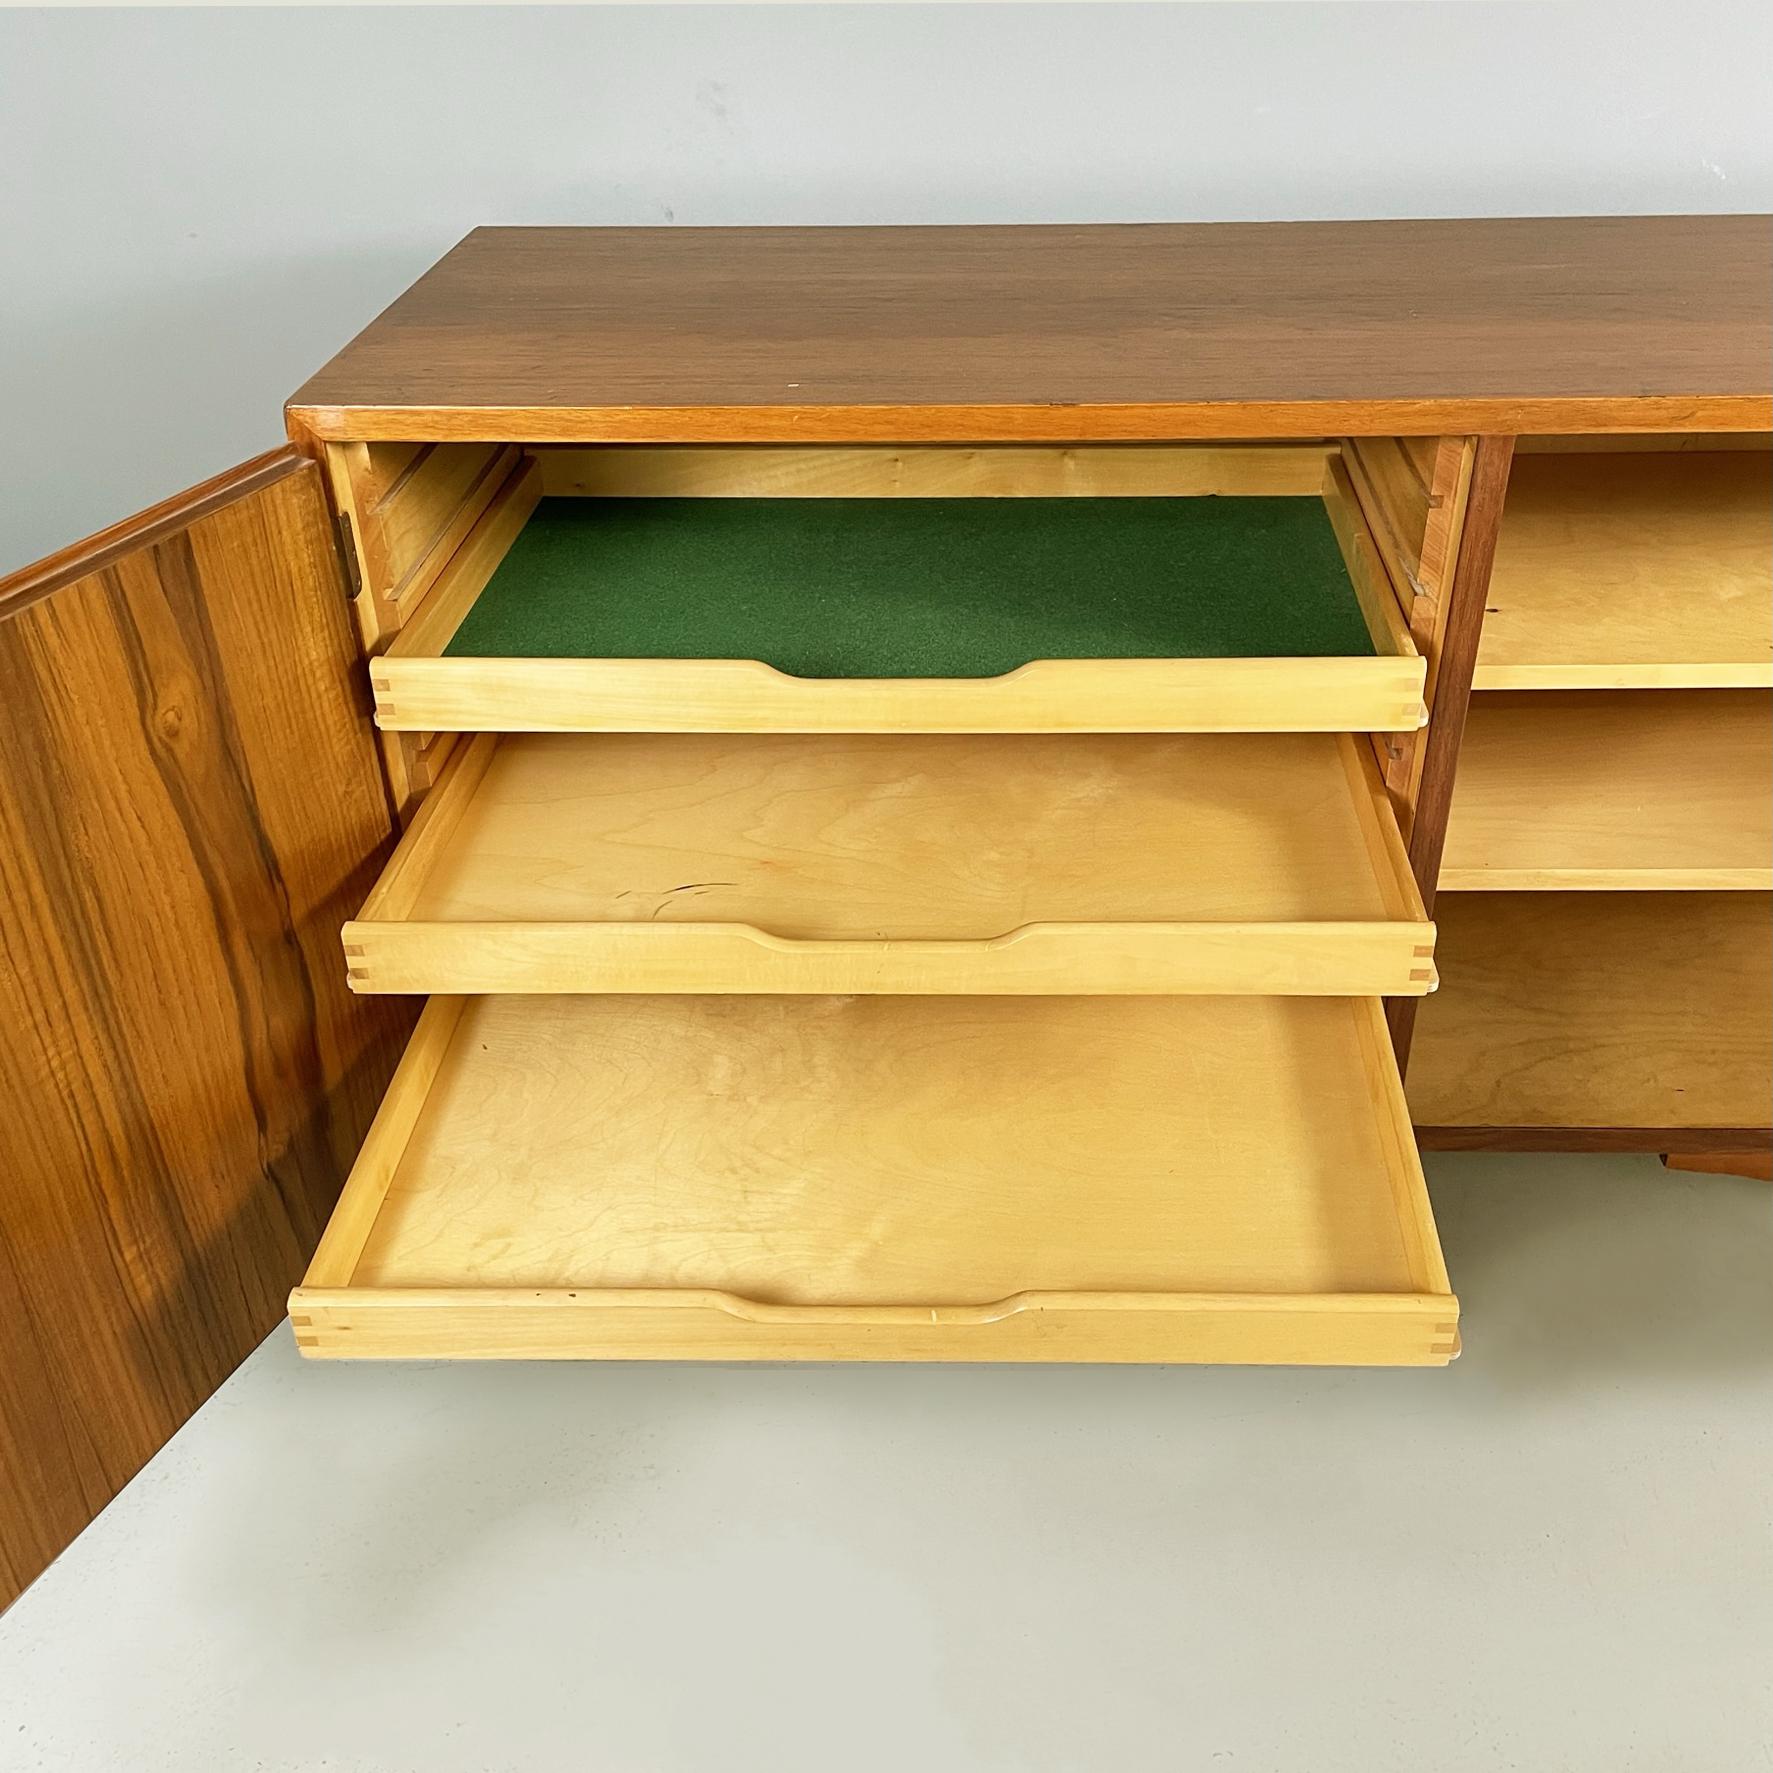 Italian Midcentury Wooden Sideboard with Drawer and Shelves, 1960s For Sale 4